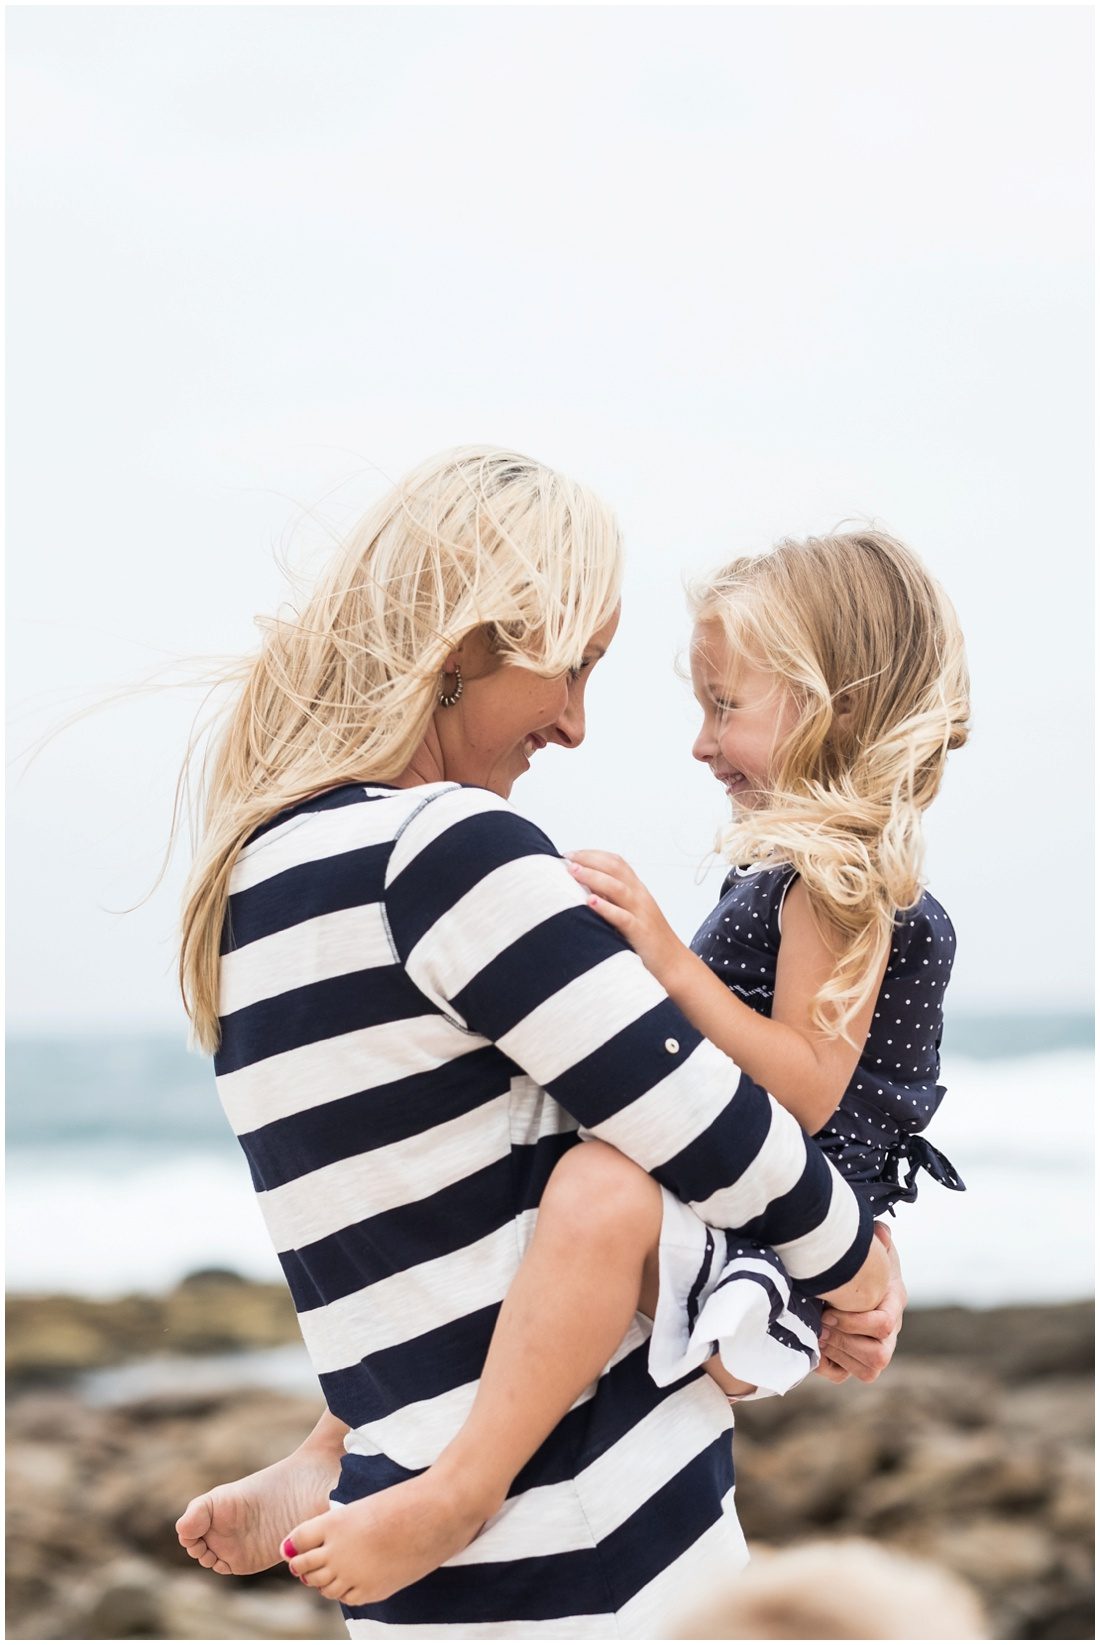 Garden Route-Mossel Bay-Studio and beach session-Haasbroek family-27